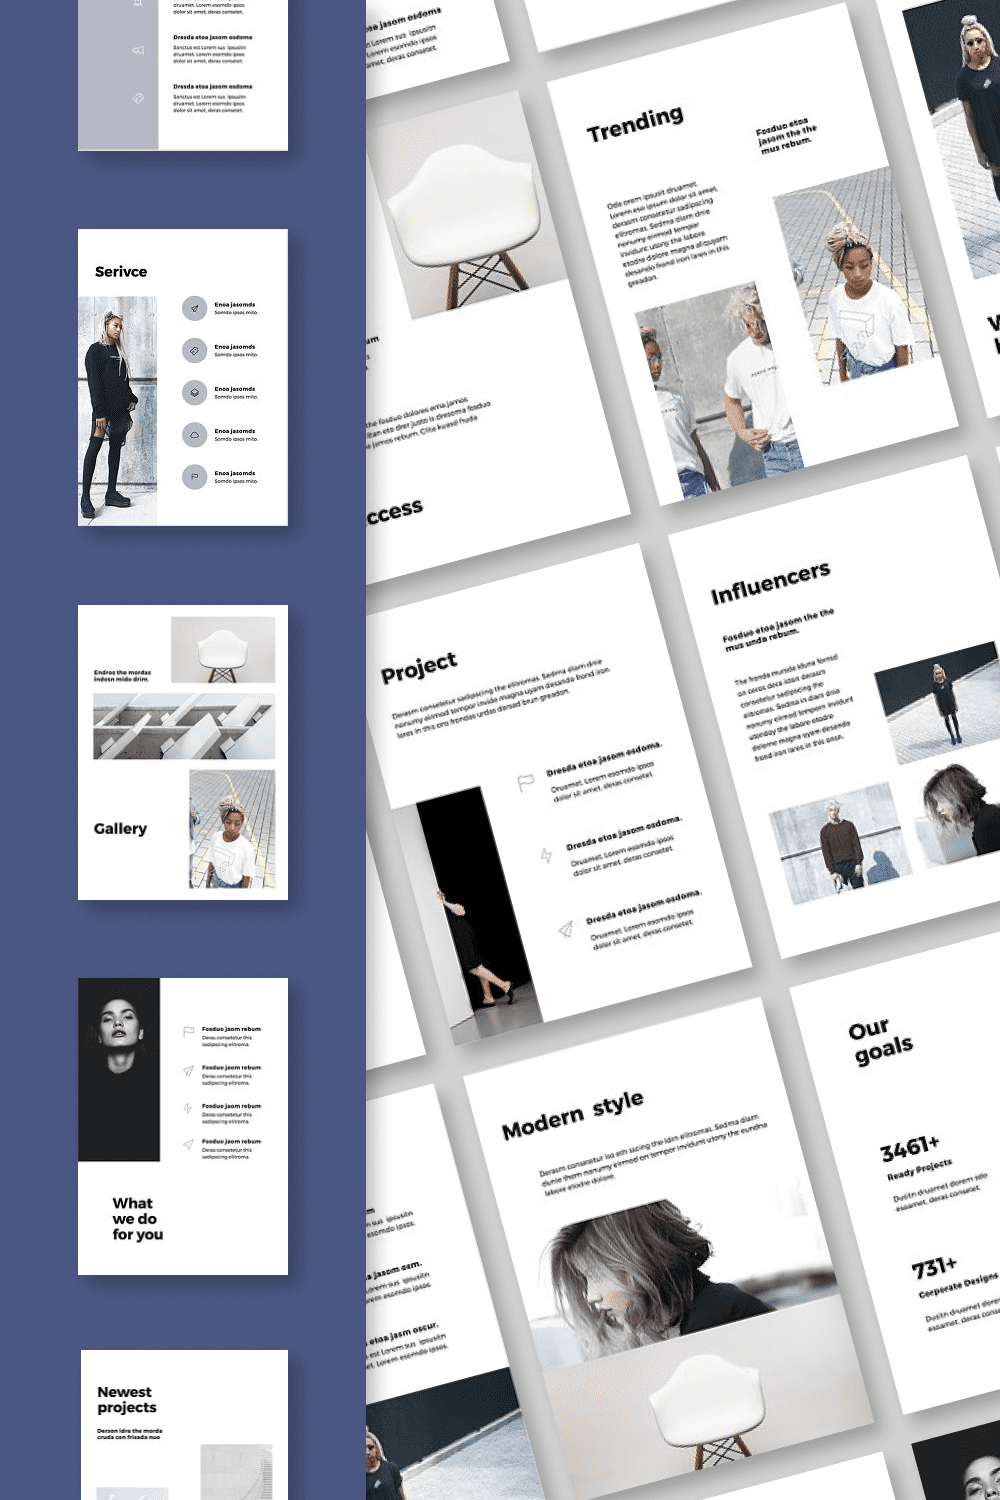 The collection of the template includes icons, infographics and diagrams, customized for the general style.